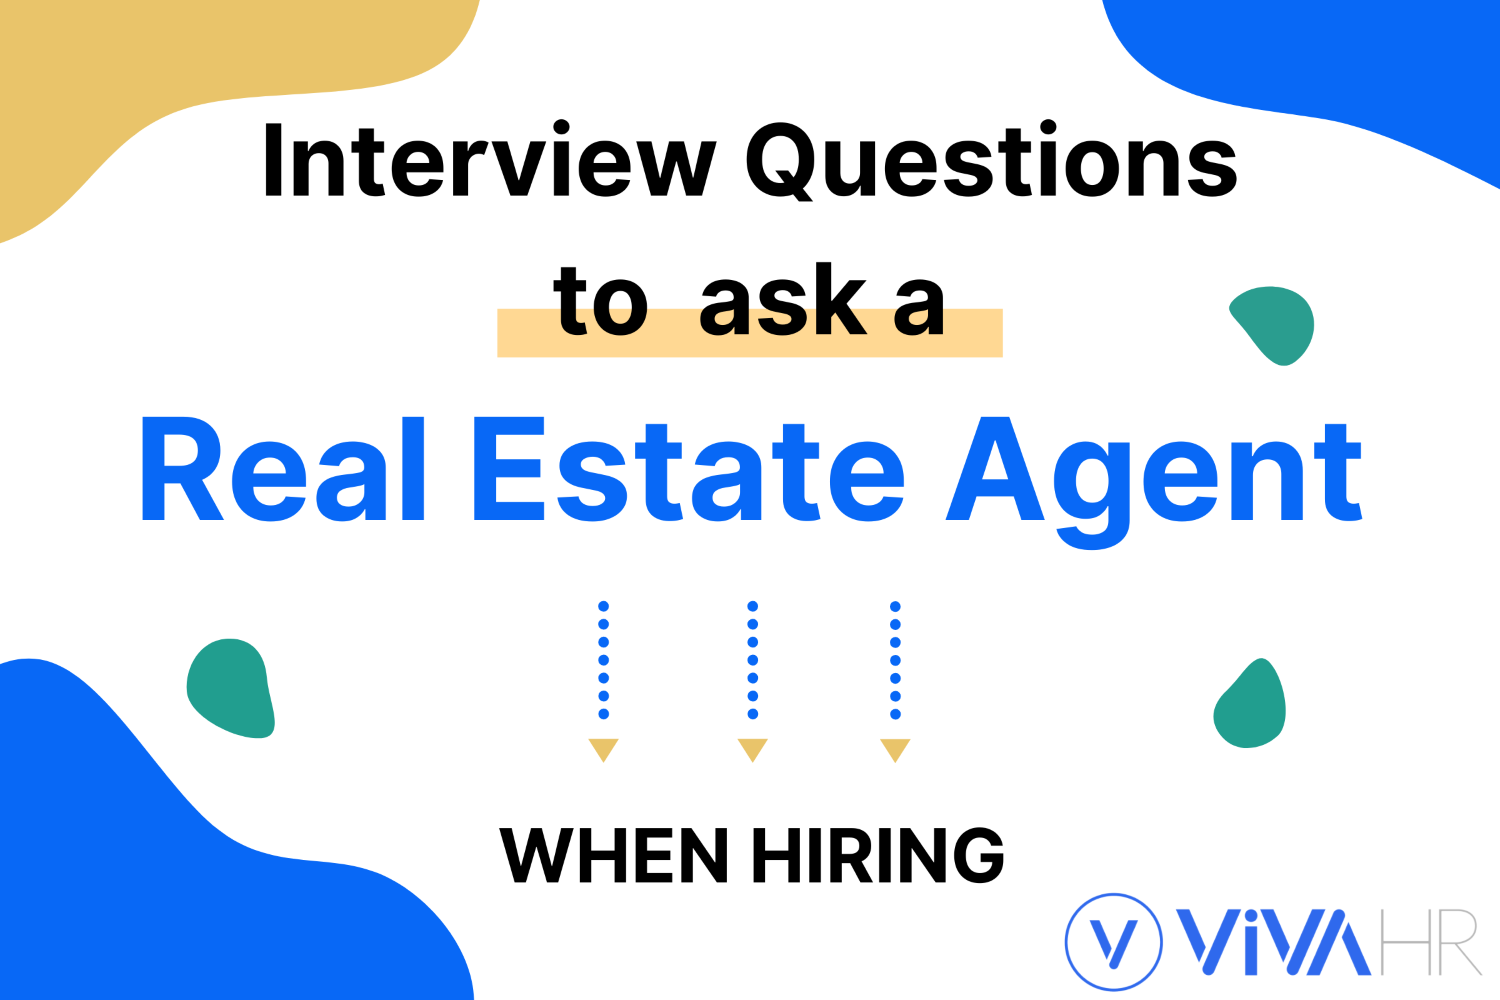 Real Estate Agent Interview Questions